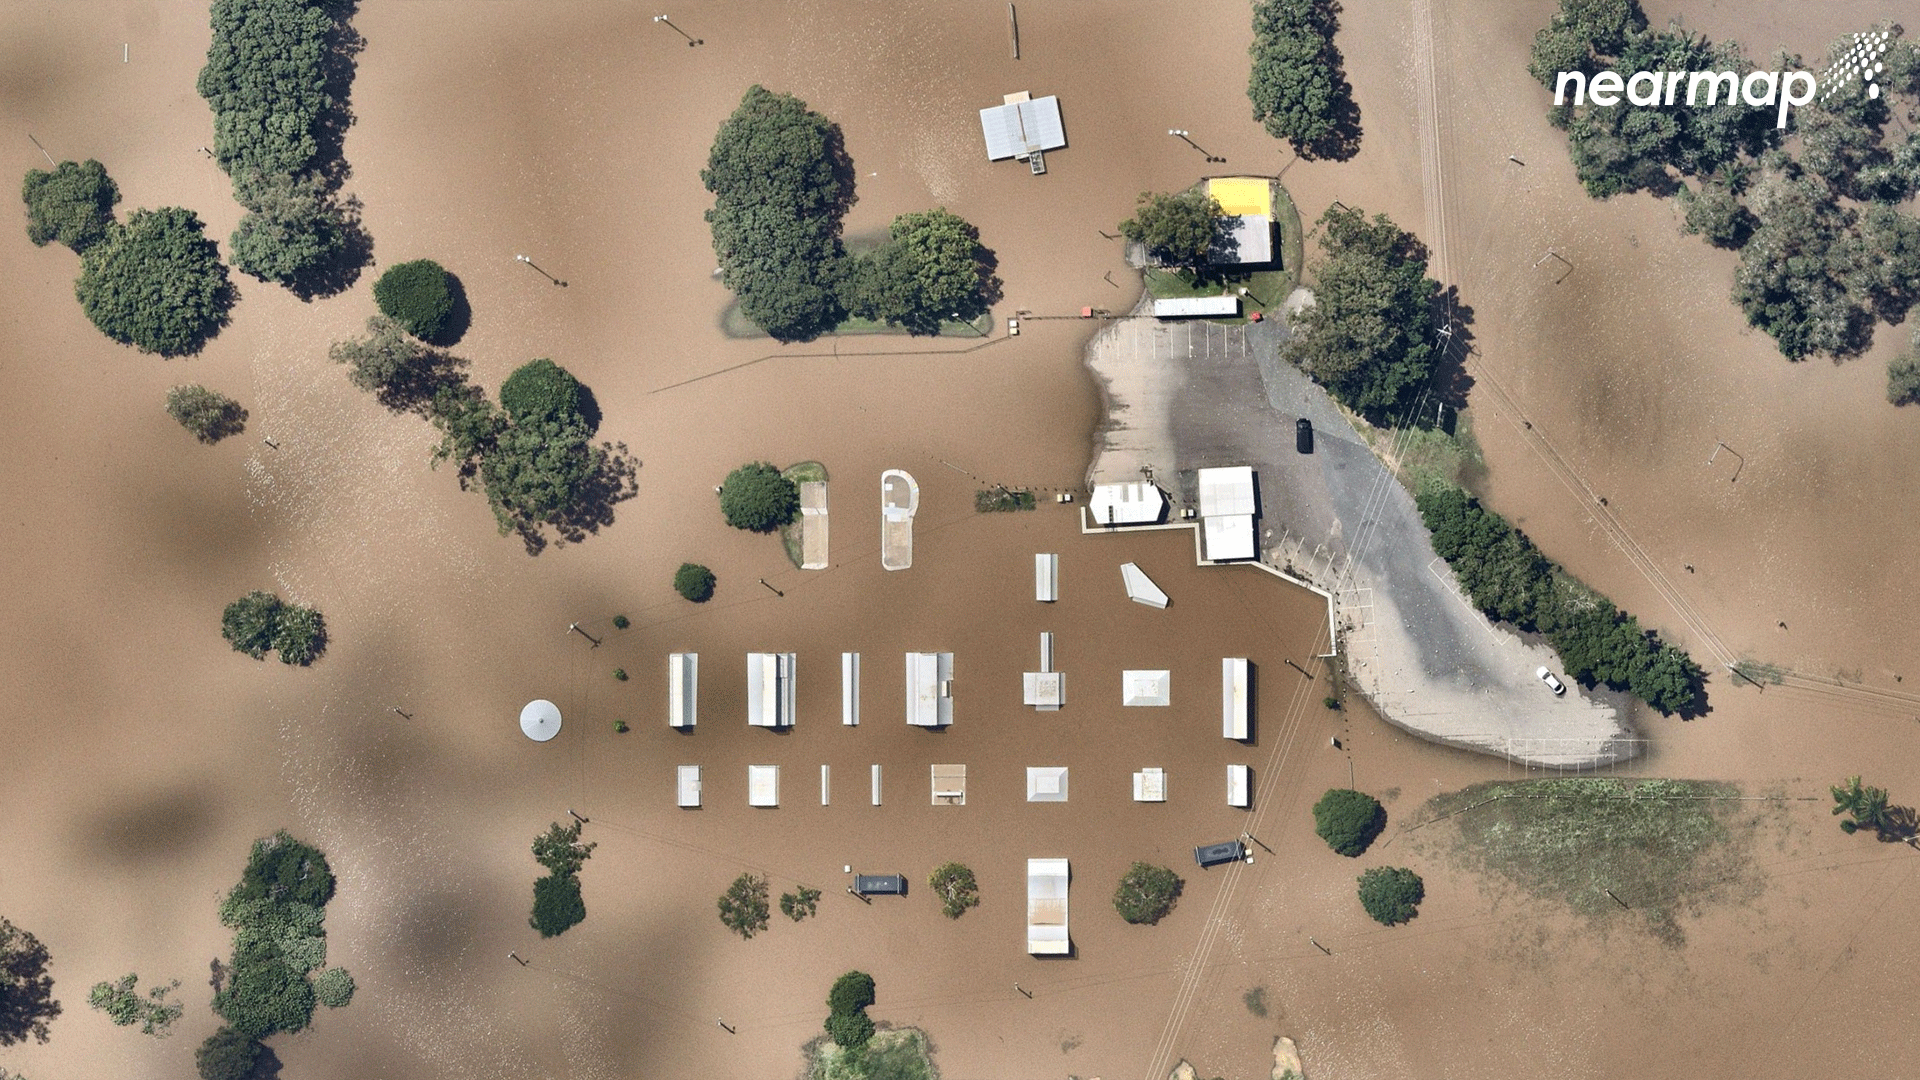 Aerial view of the town of Beenleigh, Queensland on 29 February 2022 compared with 2 March 2022 (after flooding). The images were captured by the Nearmap proprietary aerial camera system attached to planes. Photo: Nearmap / The Washington Post